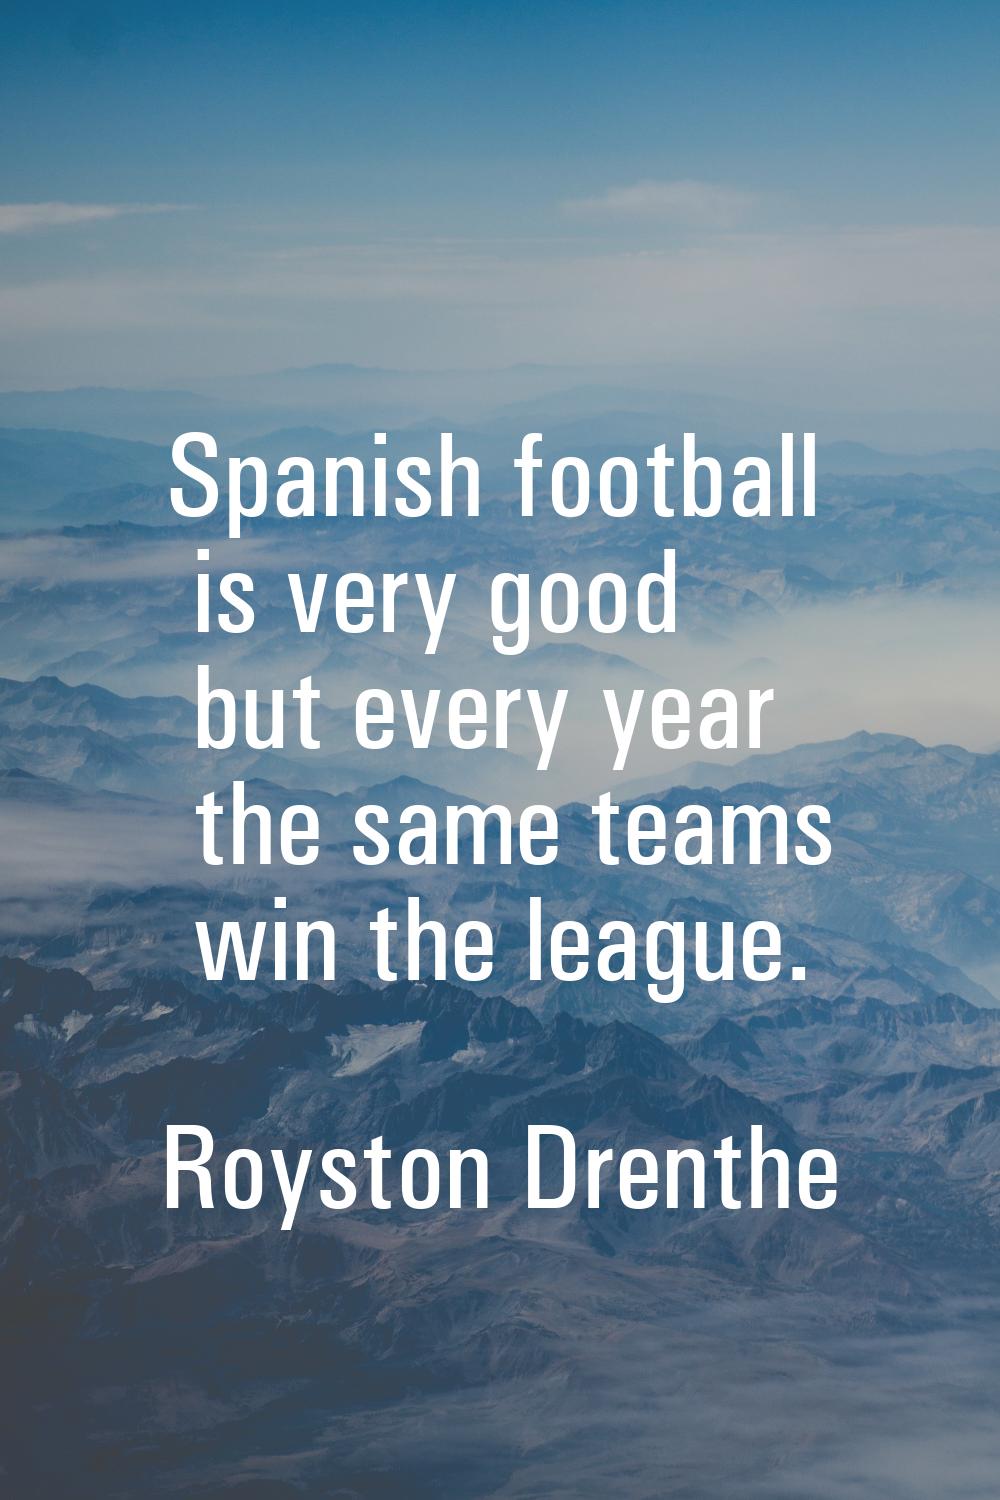 Spanish football is very good but every year the same teams win the league.